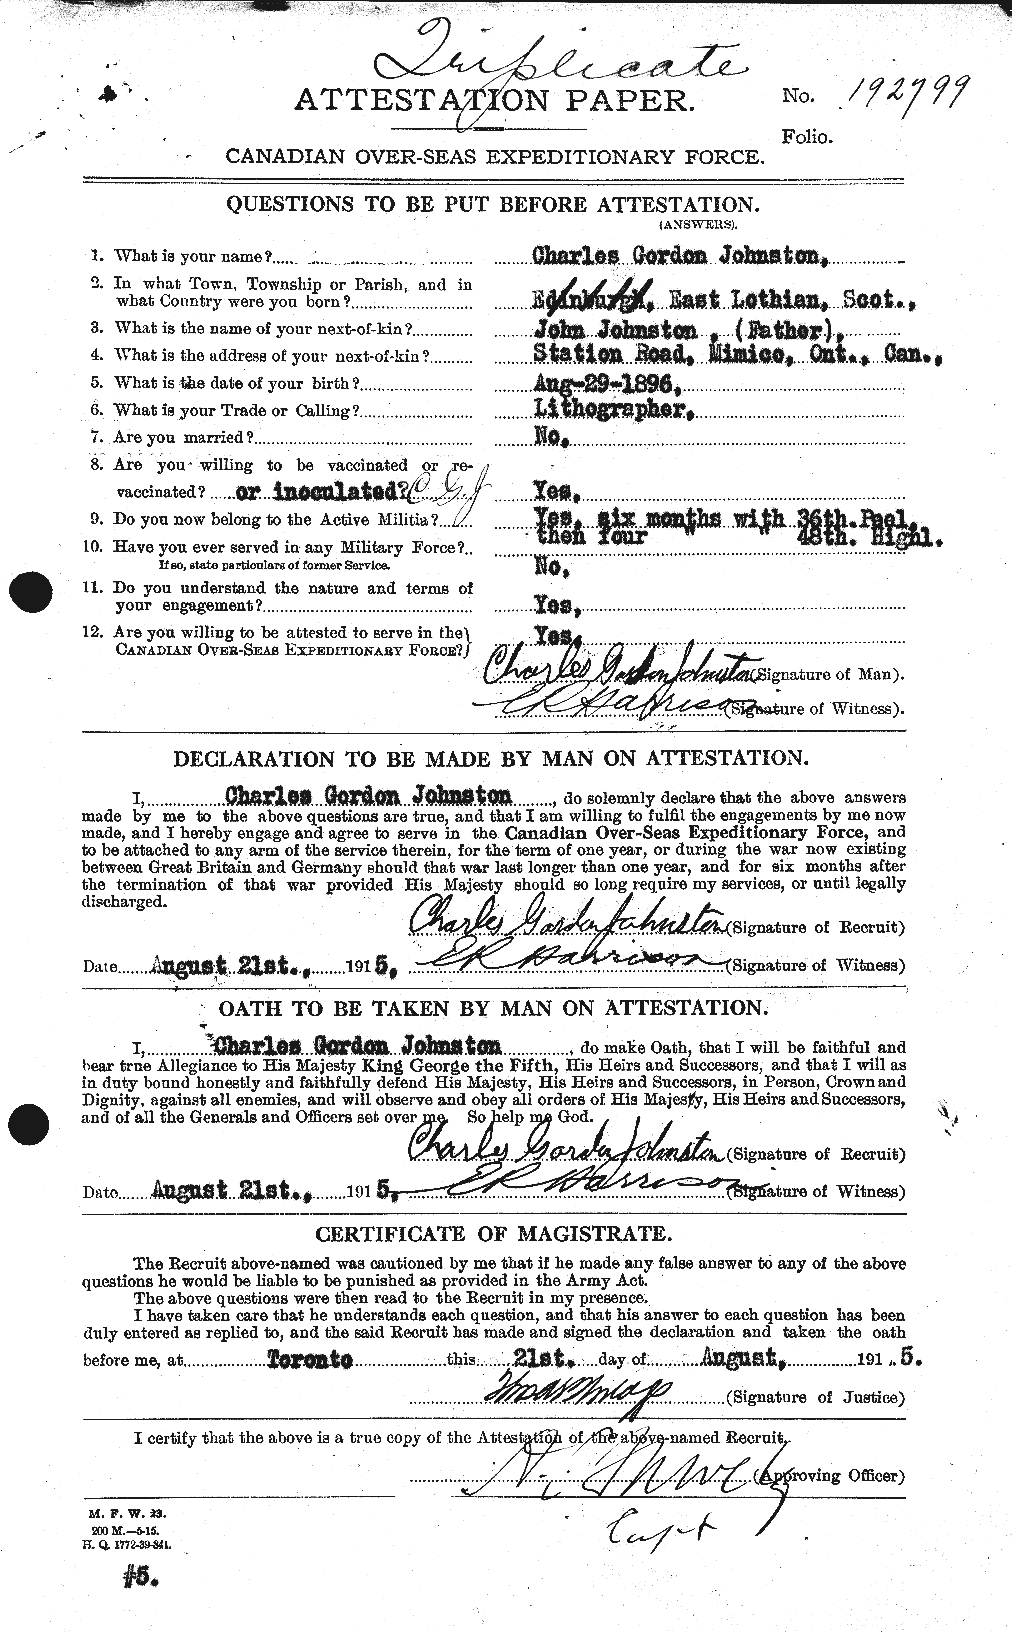 Personnel Records of the First World War - CEF 423106a